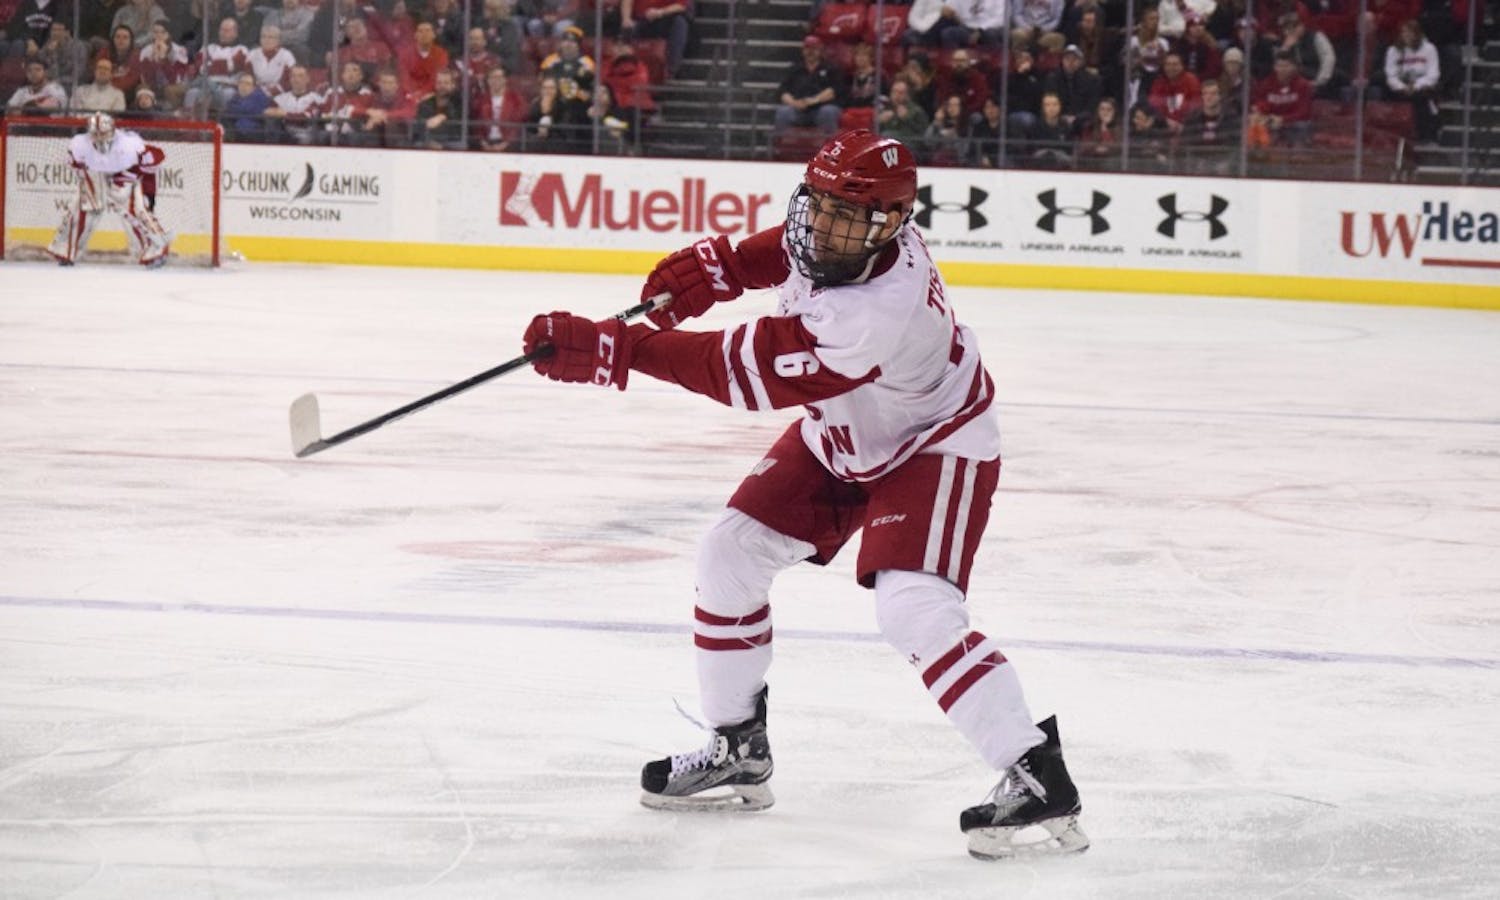 Junior Peter Tischke tied the game against Penn State with under two minutes to go on Saturday, but the Badgers could only manage one point in the Big Ten standings after losing the shootout. PSU earned five of six points for the weekend.